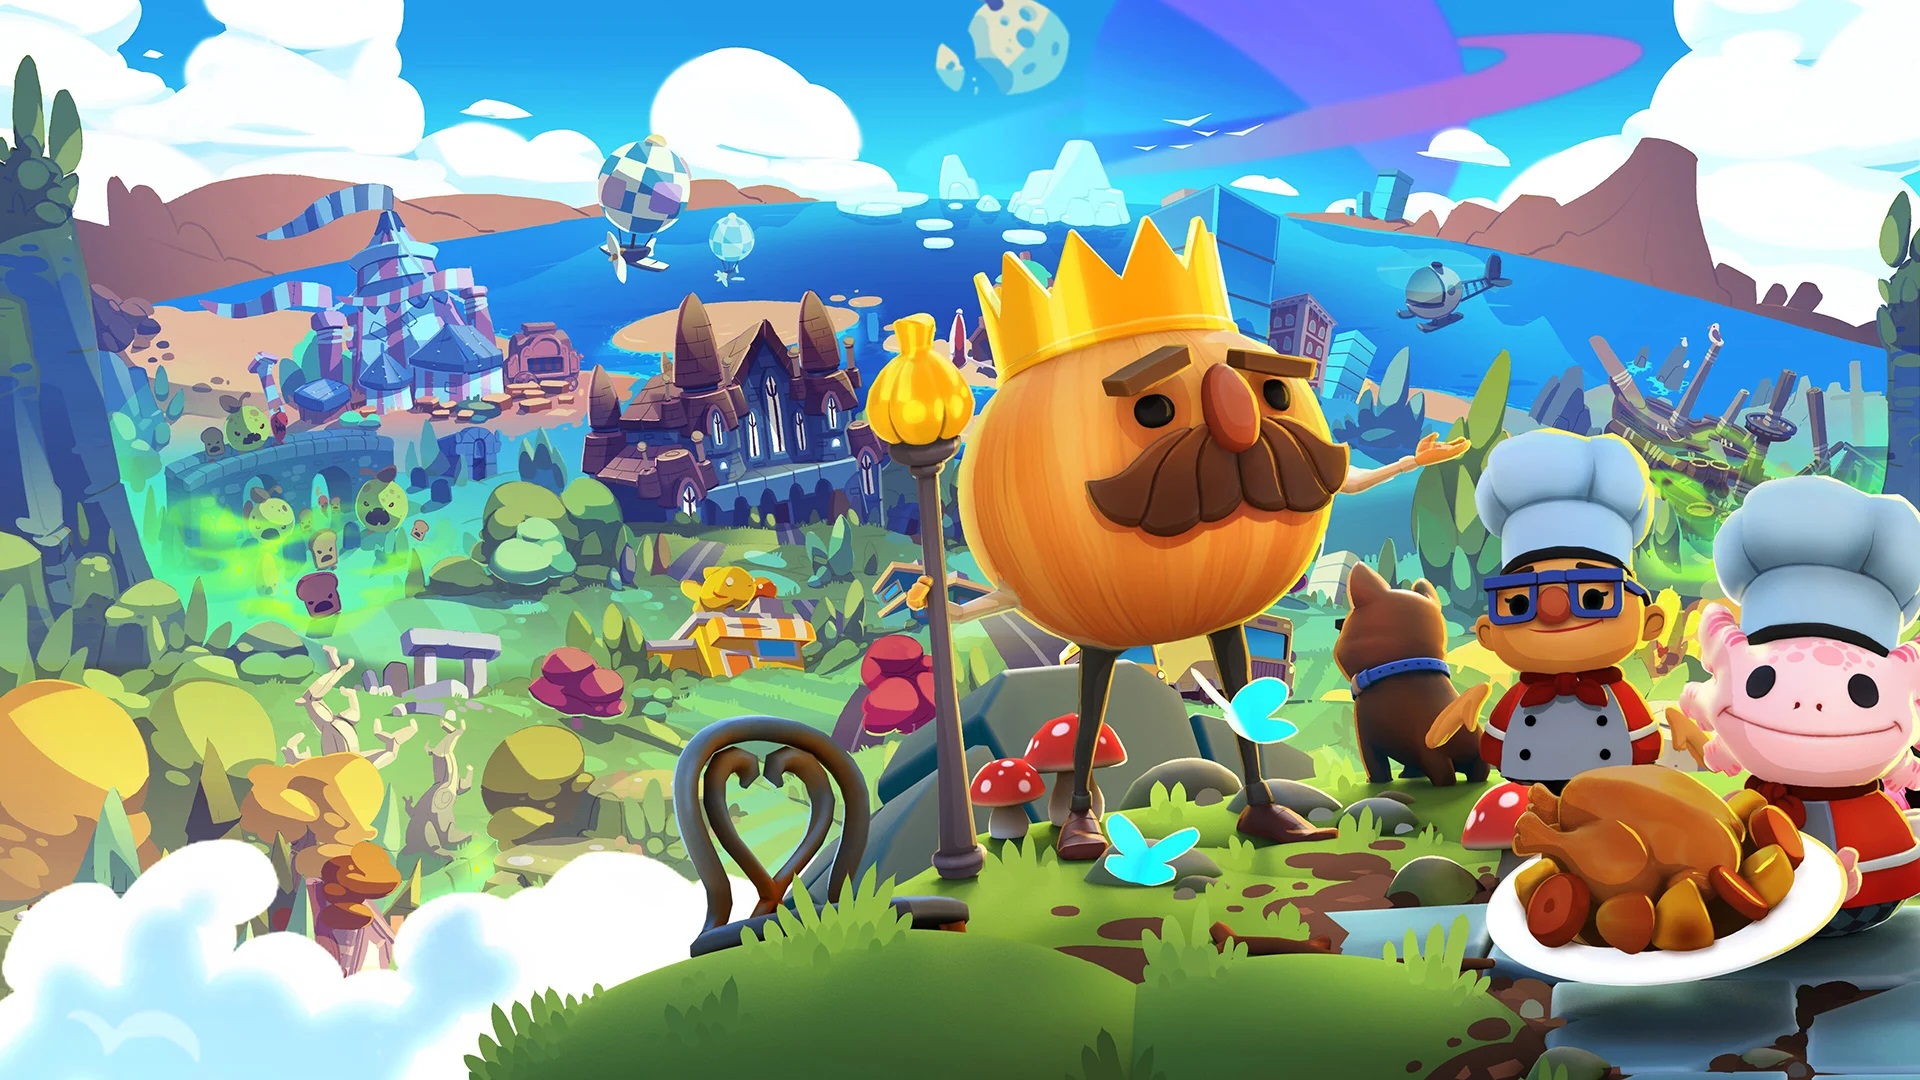 Overcooked! All You Can Eat art